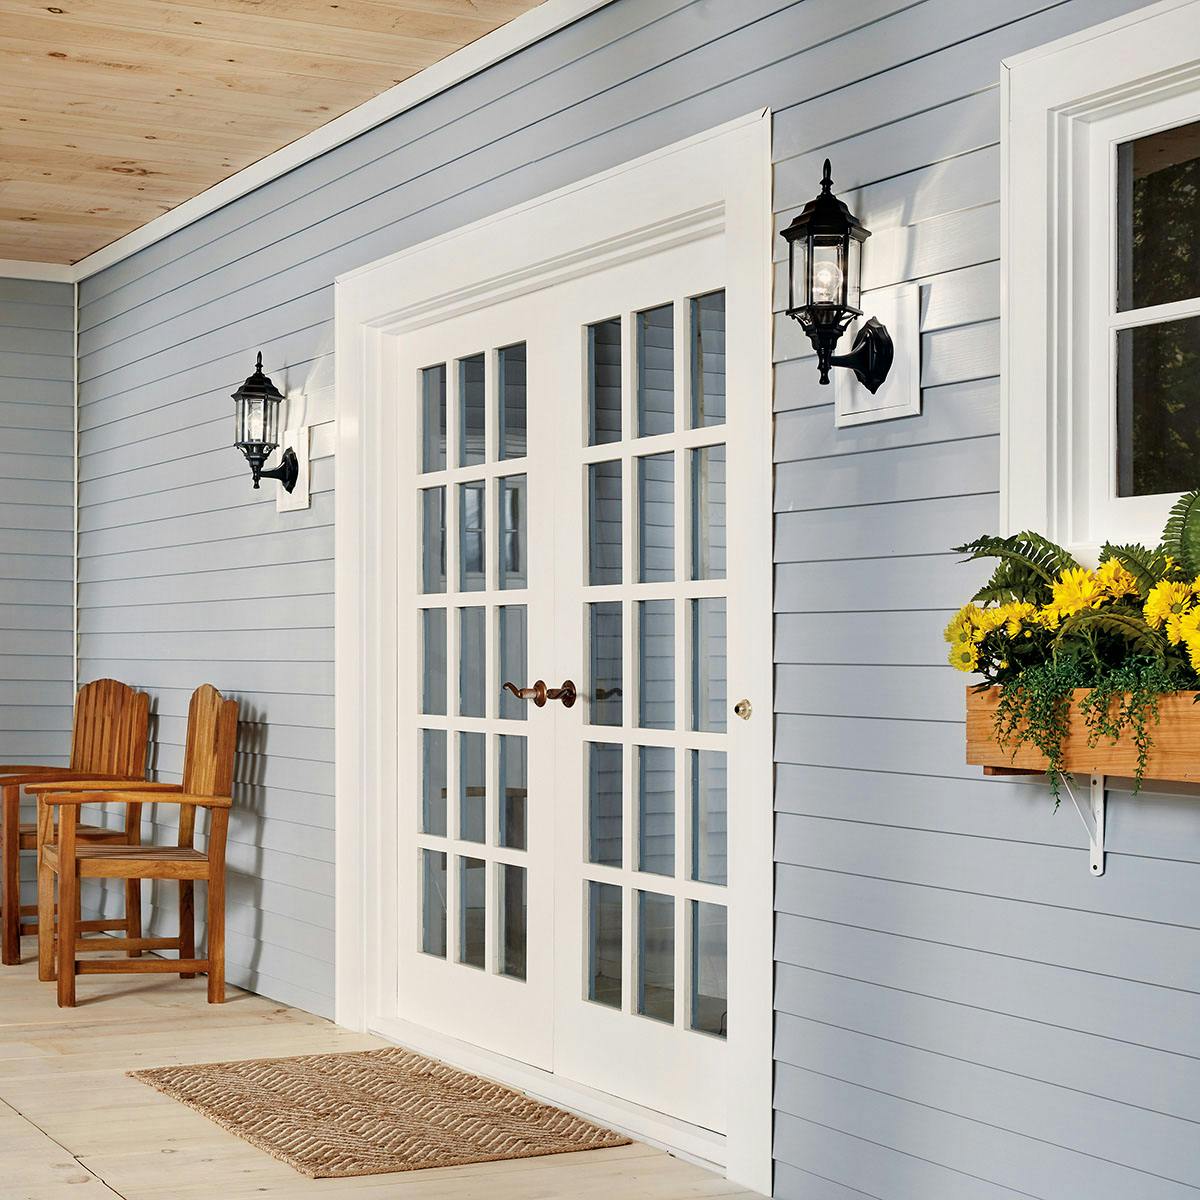 Day time Exterior image featuring Chesapeake outdoor wall light 49255BK